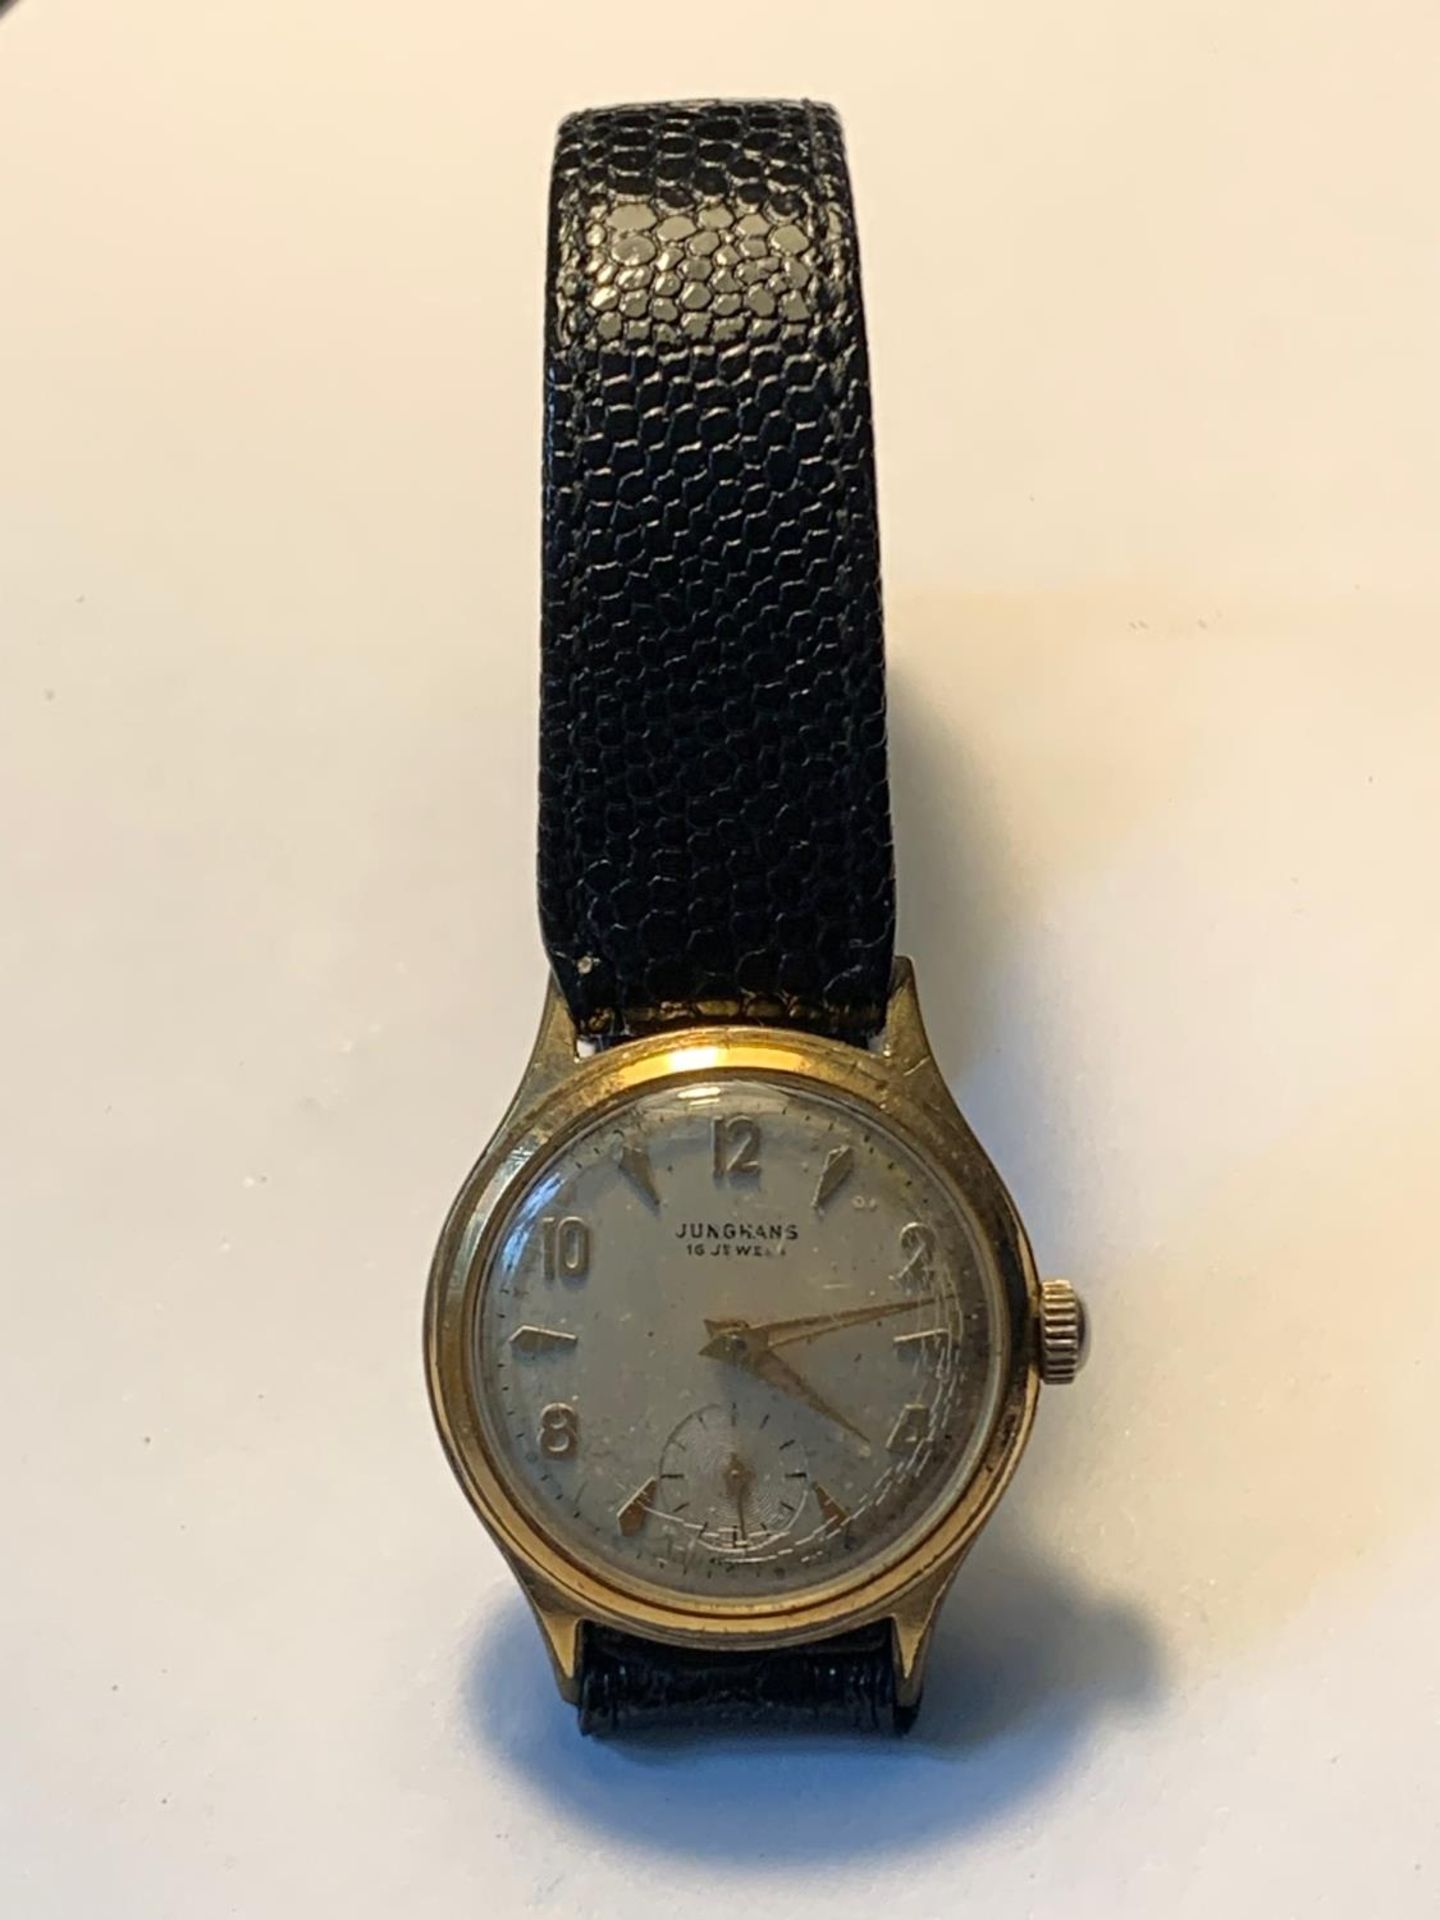 A 1960'S JUNGHANS 16 JEWEL WRIST WATCH WITH SUB DIAL AND BLACK LEATHER STRAP. SEEN WORKING BUT NO